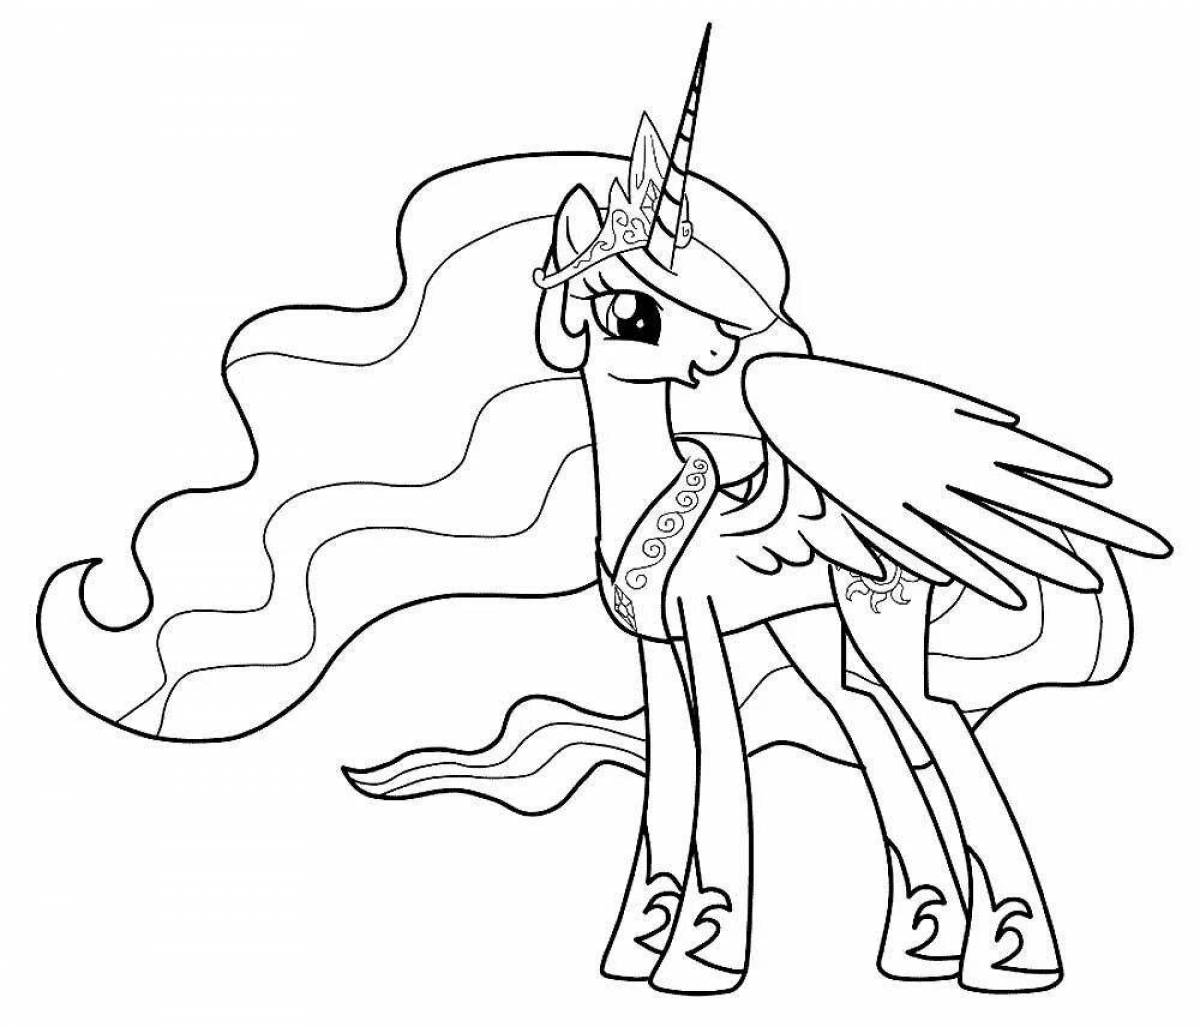 Coloring page my little pony is happy